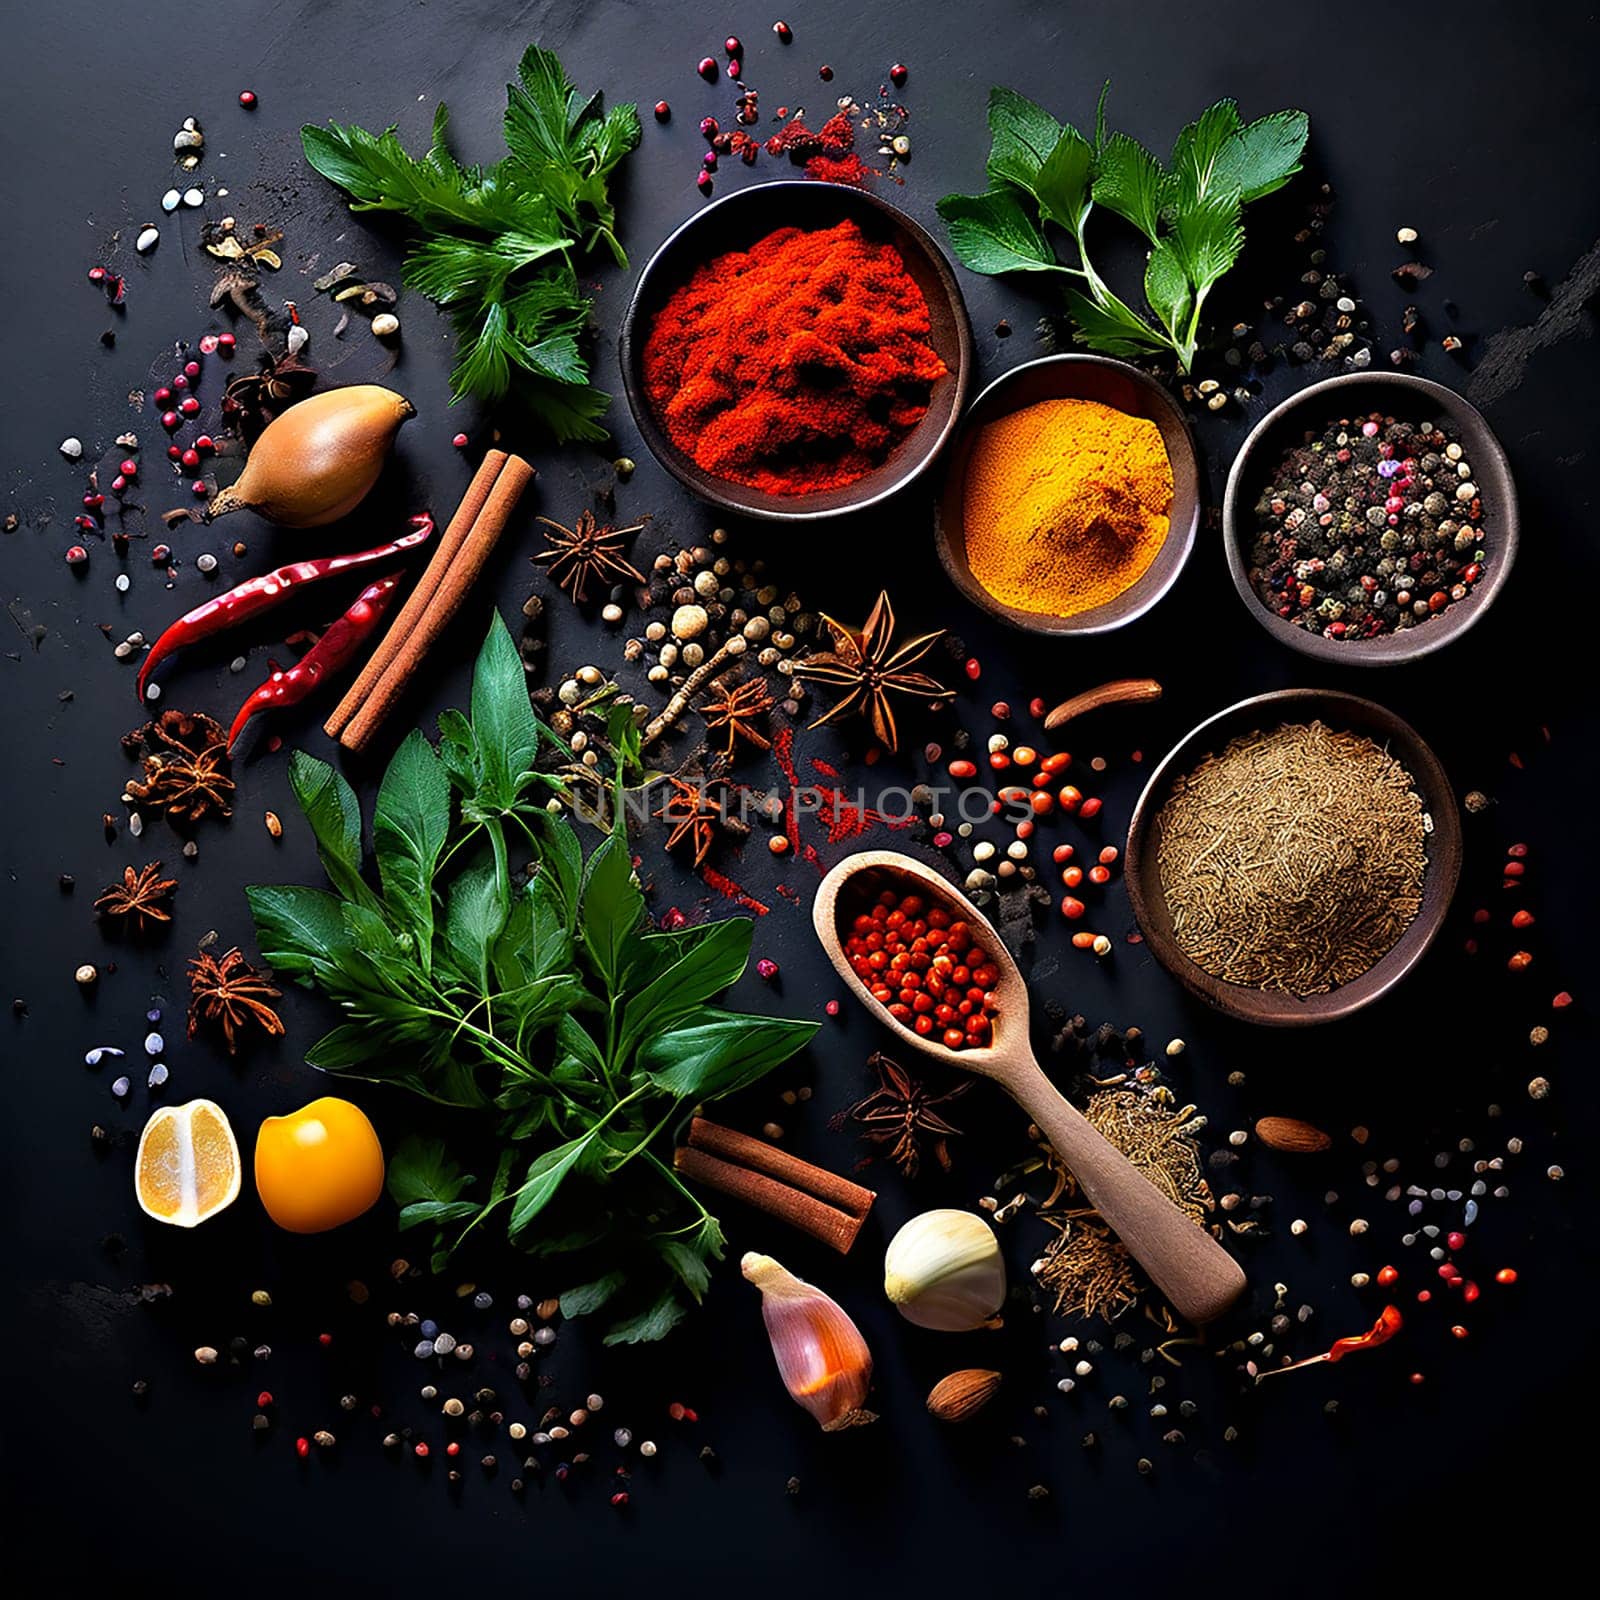 Taste of Tradition: Colorful Herbs and Spices for Flavorful Cooking by Petrichor